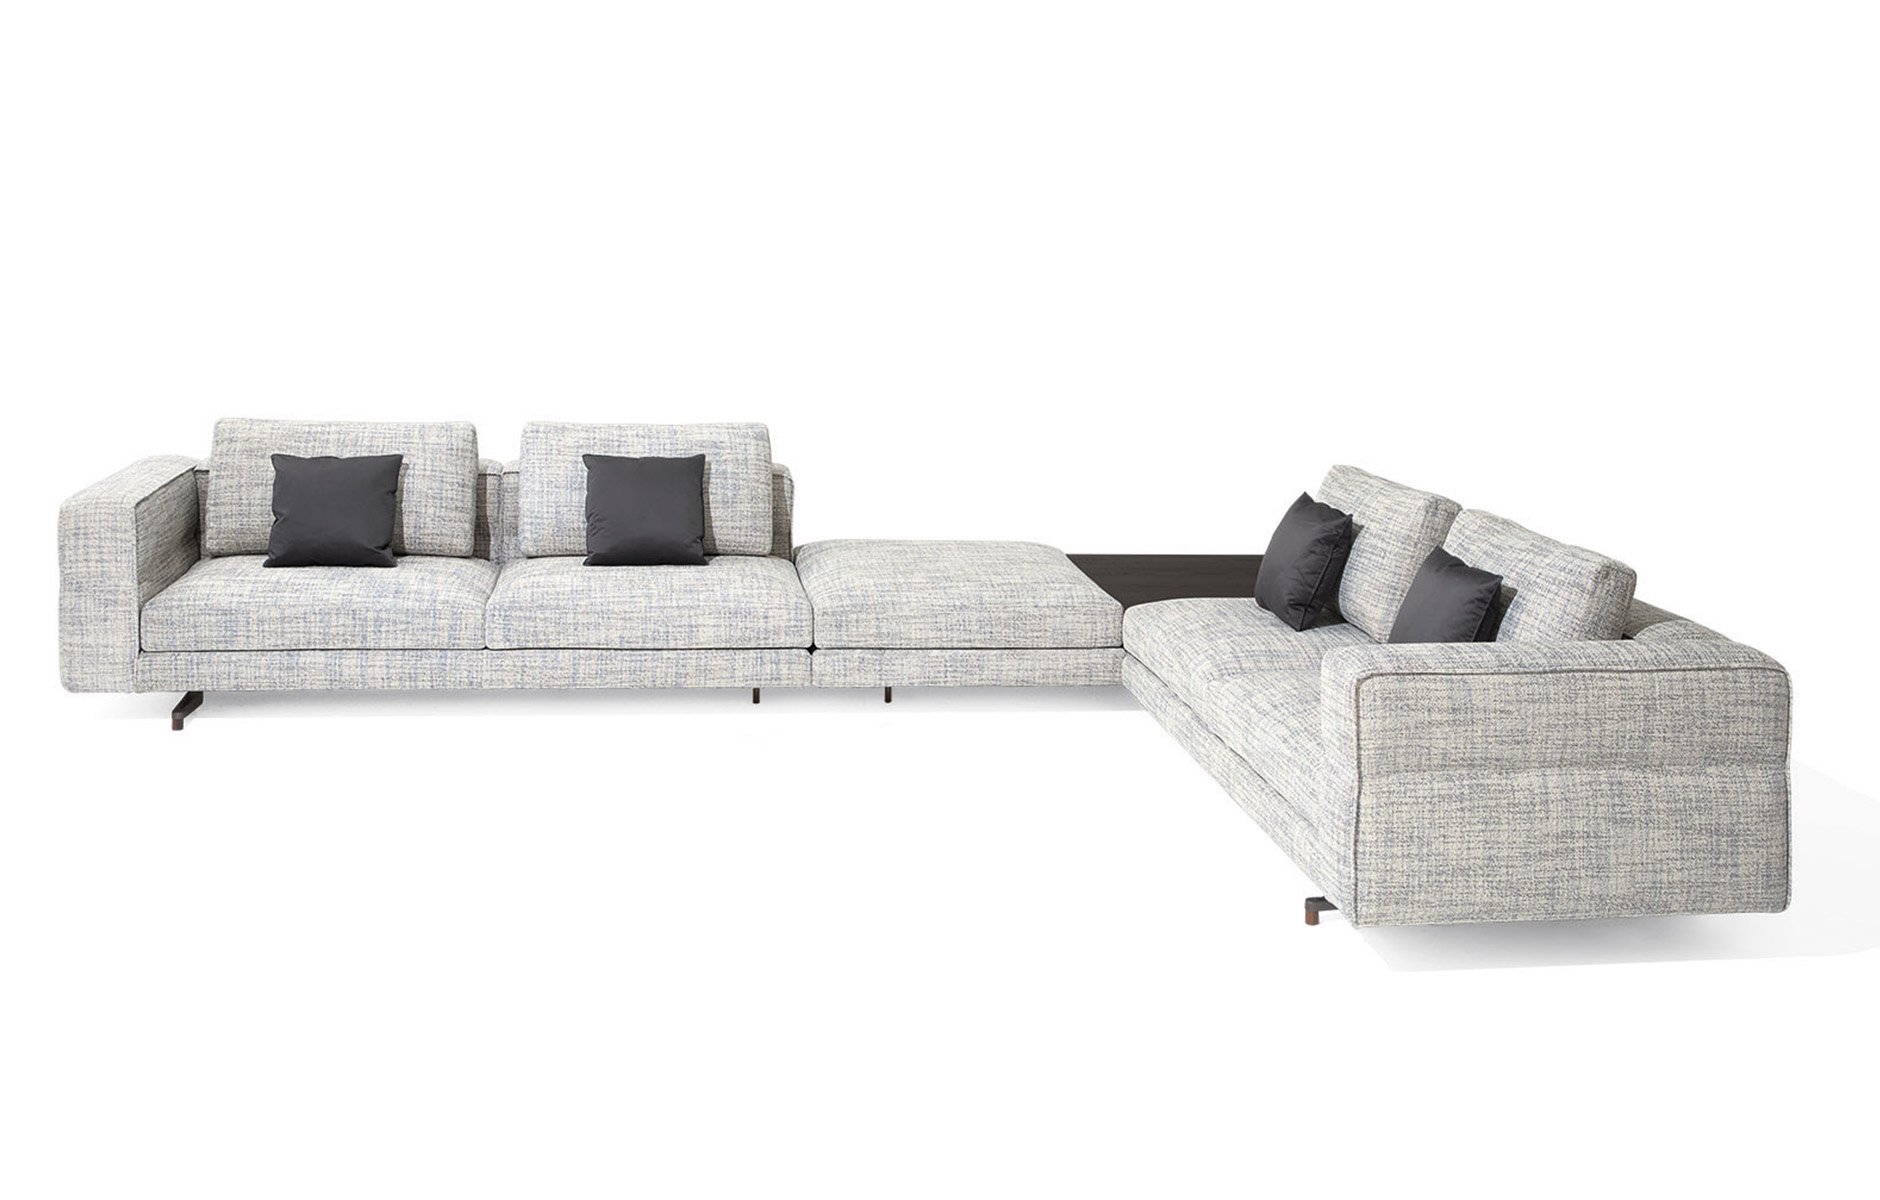 The SoHo modular sofa system, here and following, by Carlo Colombo for Giorgetti. Photos c/o Giorgetti. 